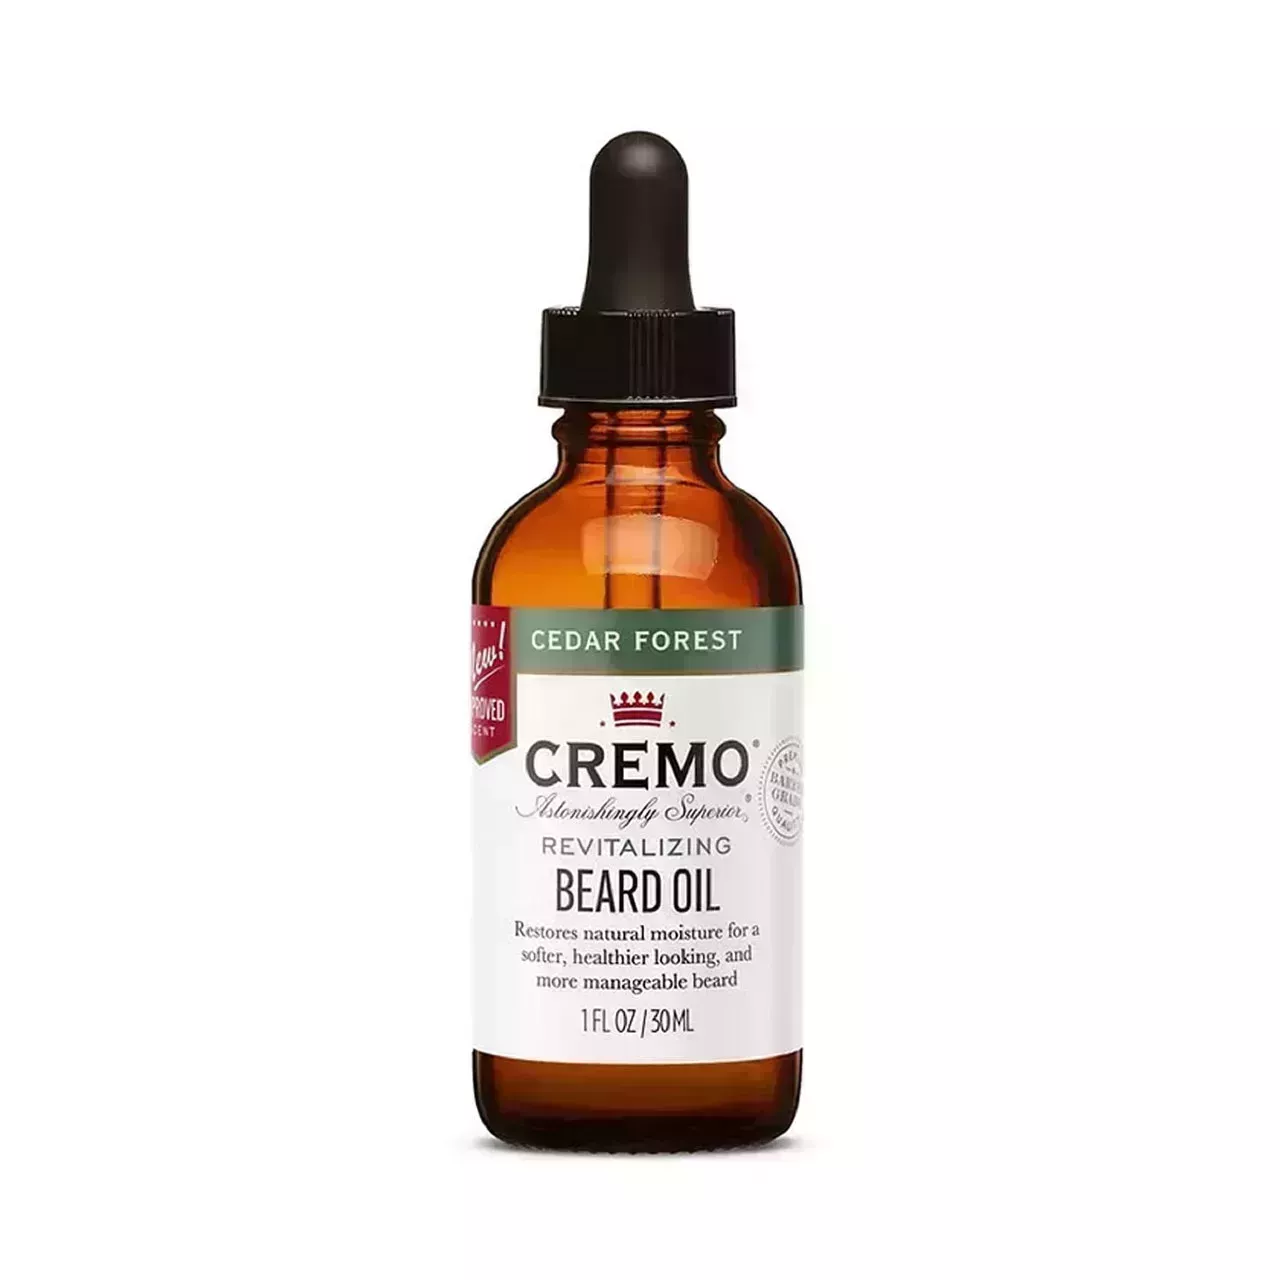 Cremo Beard Oil brown serum bottle with white label and black dropper cap on white background